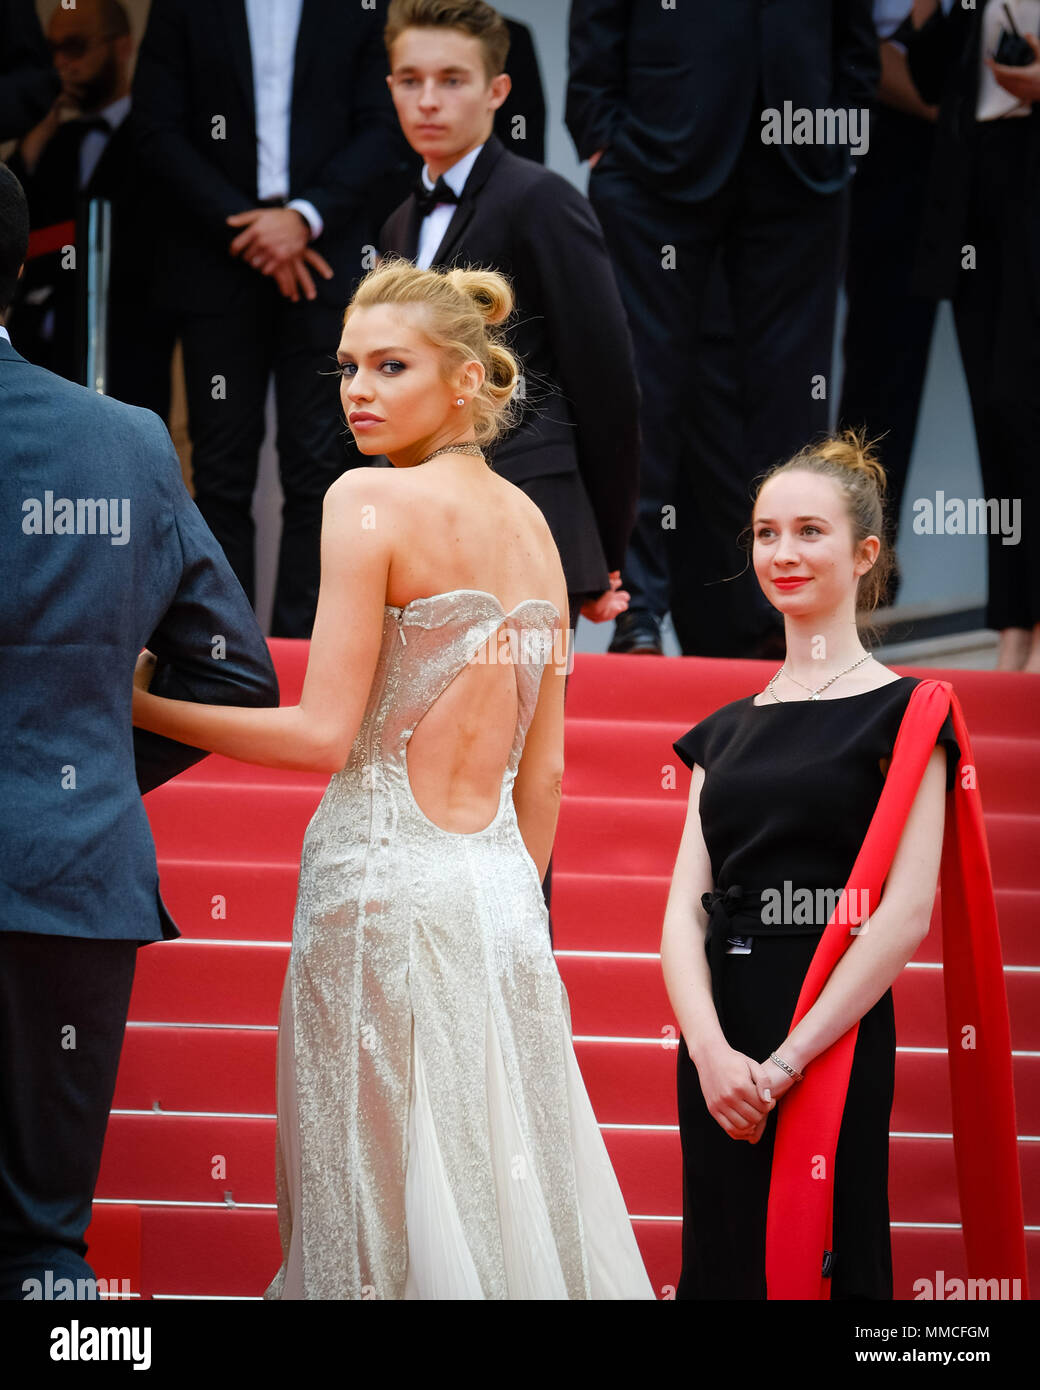 Cannes, France. 10th May, 2018. Stella Maxwell at the Sorry Angel Red Carpet Event on Thursday 10 May 2018 as part of the 71st International Cannes Film Festival held at Palais des Festivals, Cannes. The French title of the film is Plaire, aimer et courir vite . Pictured: Stella Maxwell. Picture by Credit: Julie Edwards/Alamy Live News Stock Photo